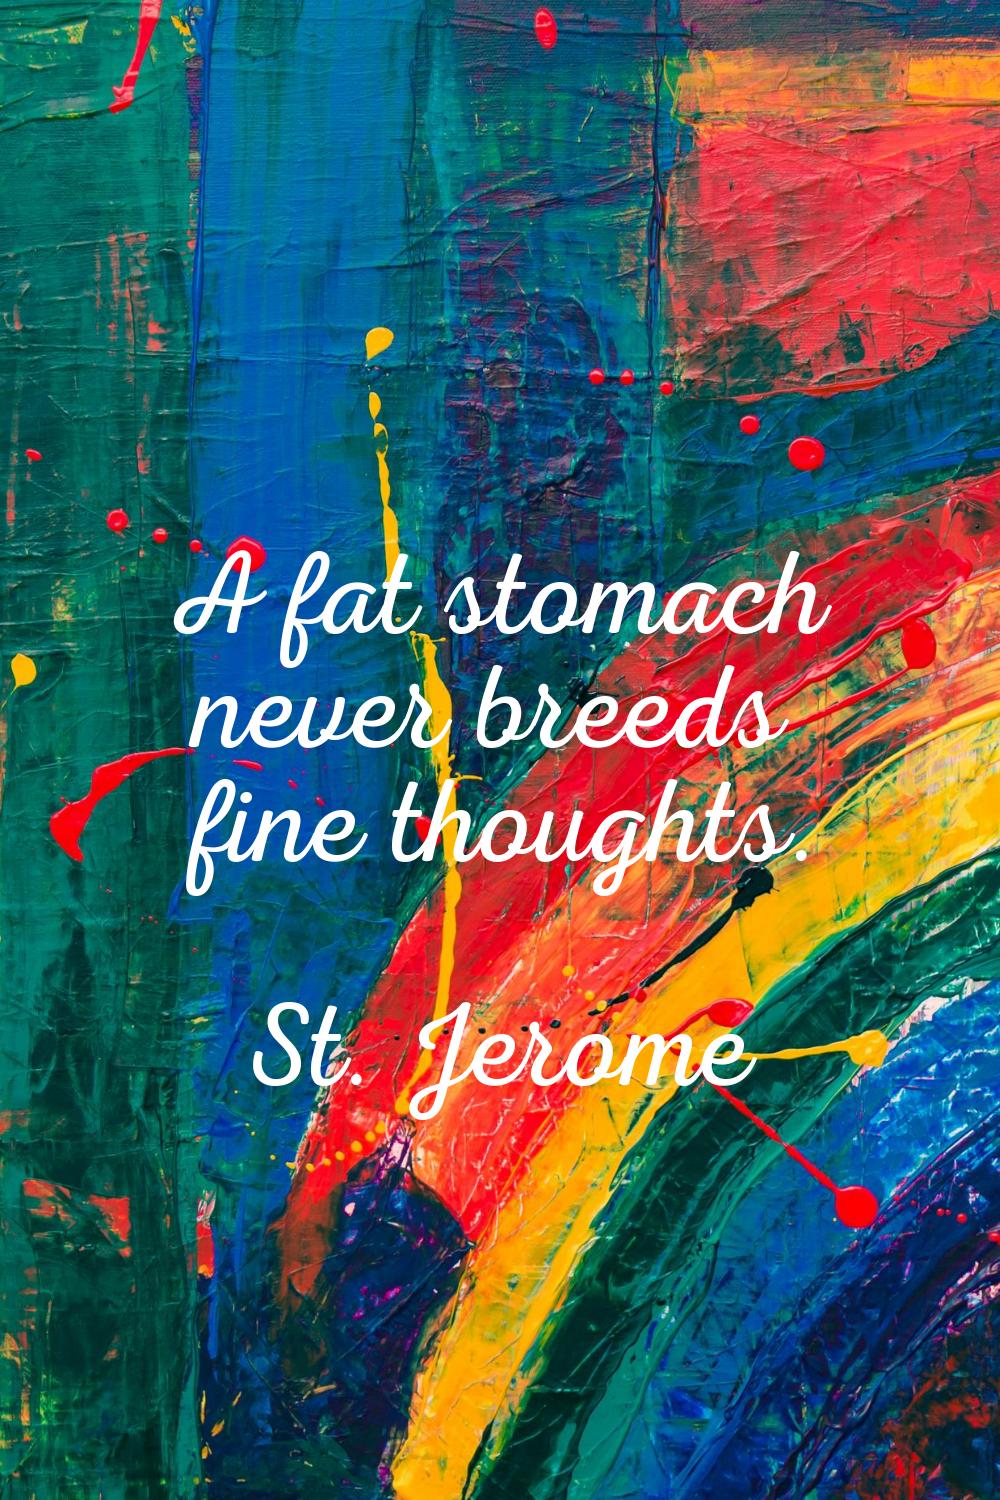 A fat stomach never breeds fine thoughts.